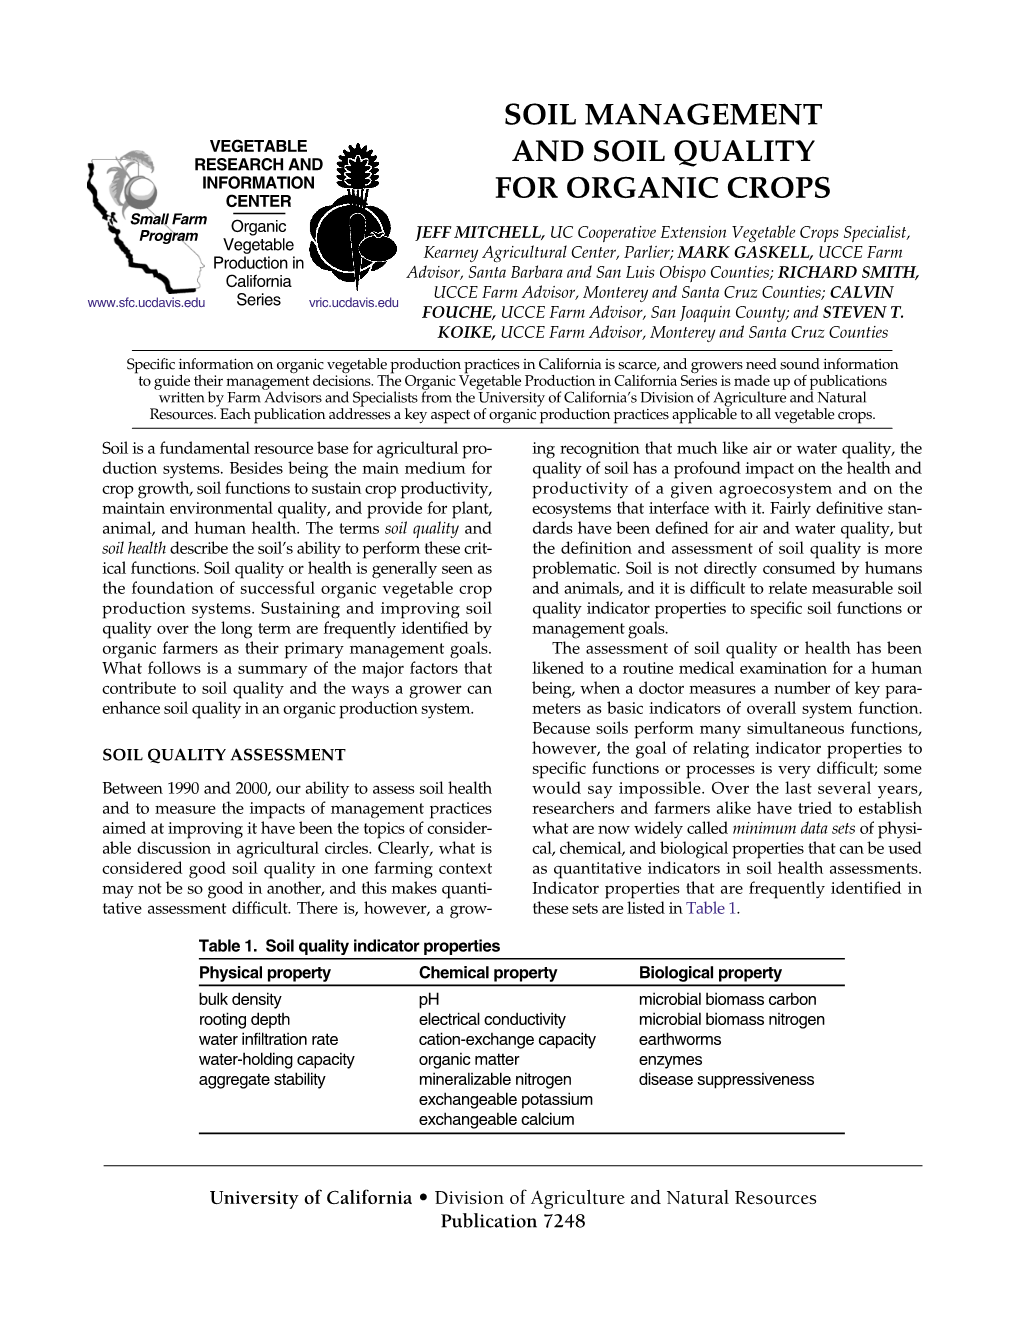 Soil Management and Soil Quality for Organic Crops •2